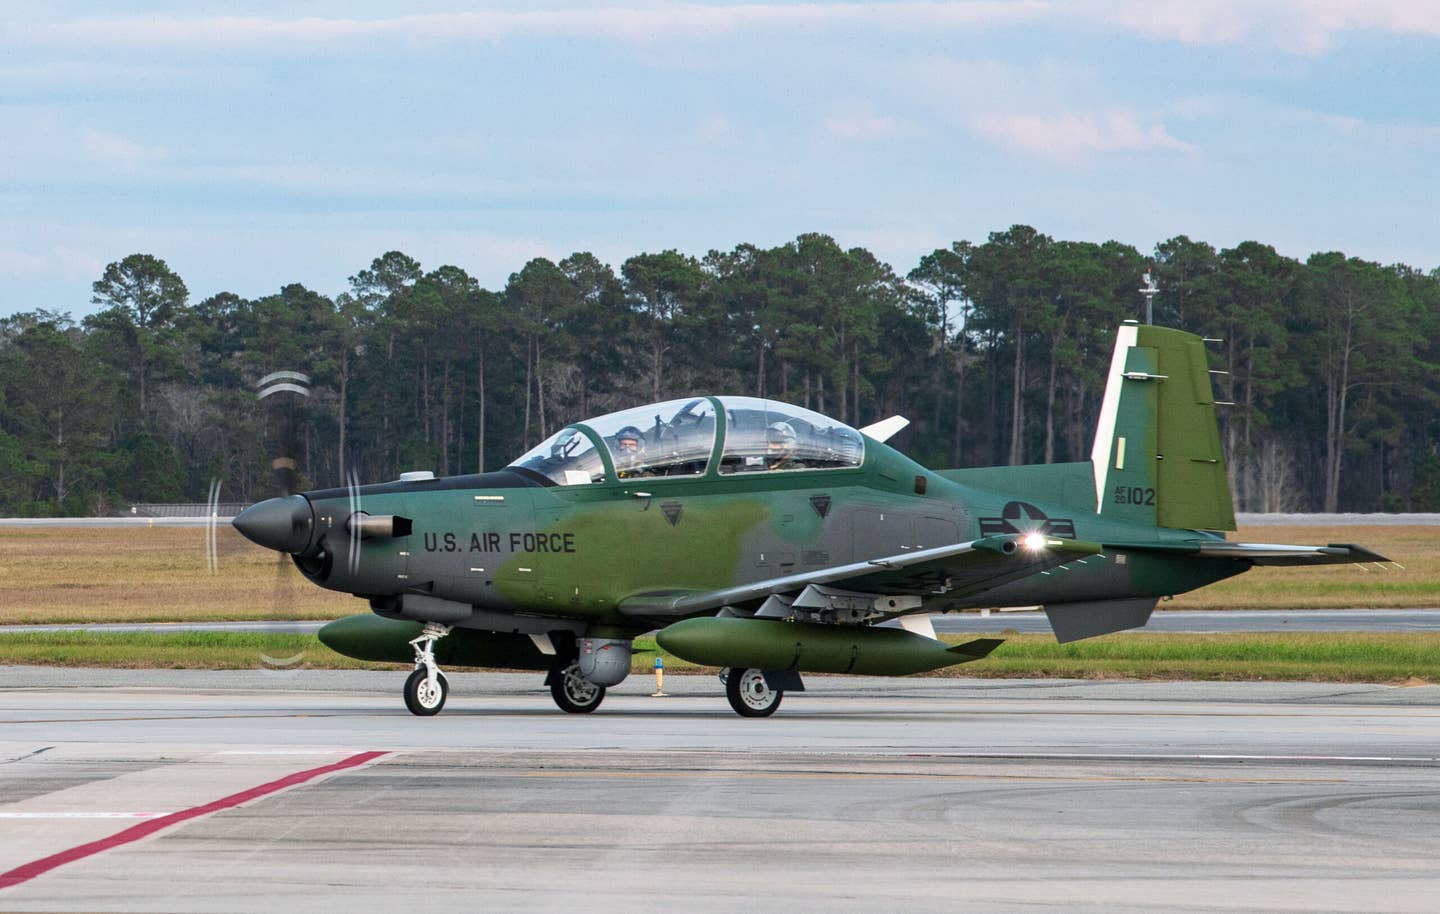 One of the two U.S. Air Force AT-6E Wolverines taxis on the flight line during its arrival at Moody Air Force, Georgia, on January 12, 2022. <em>U.S. Air Force photo by Andrea Jenkins</em>